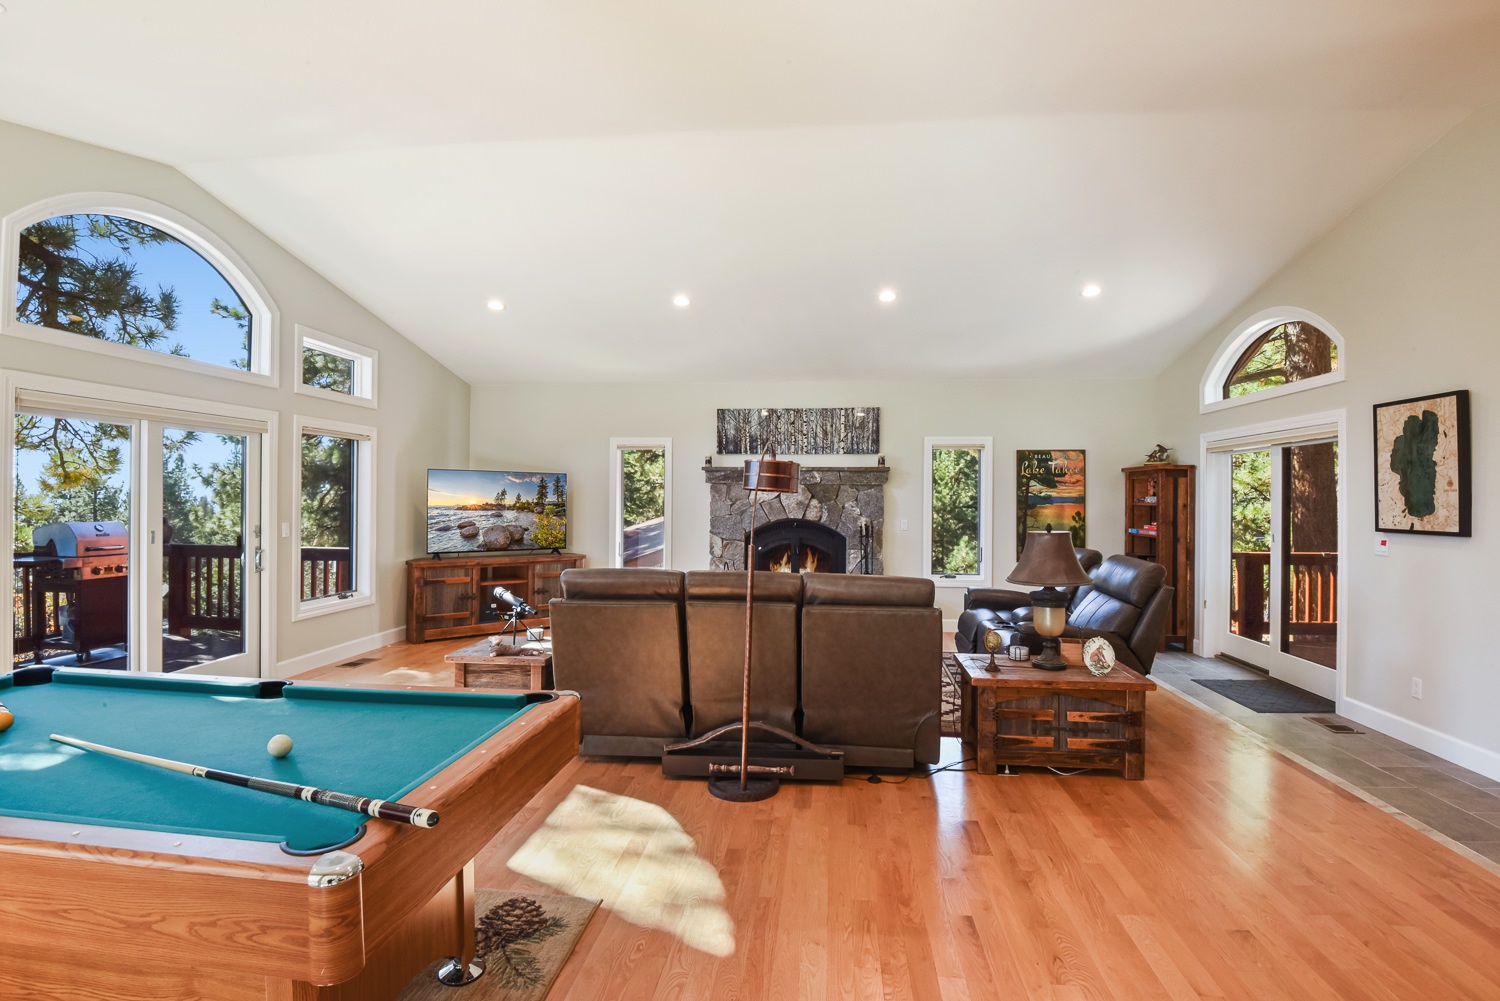 Open living space with pool table, dart set, gas fireplace, Smart TV, and deck access